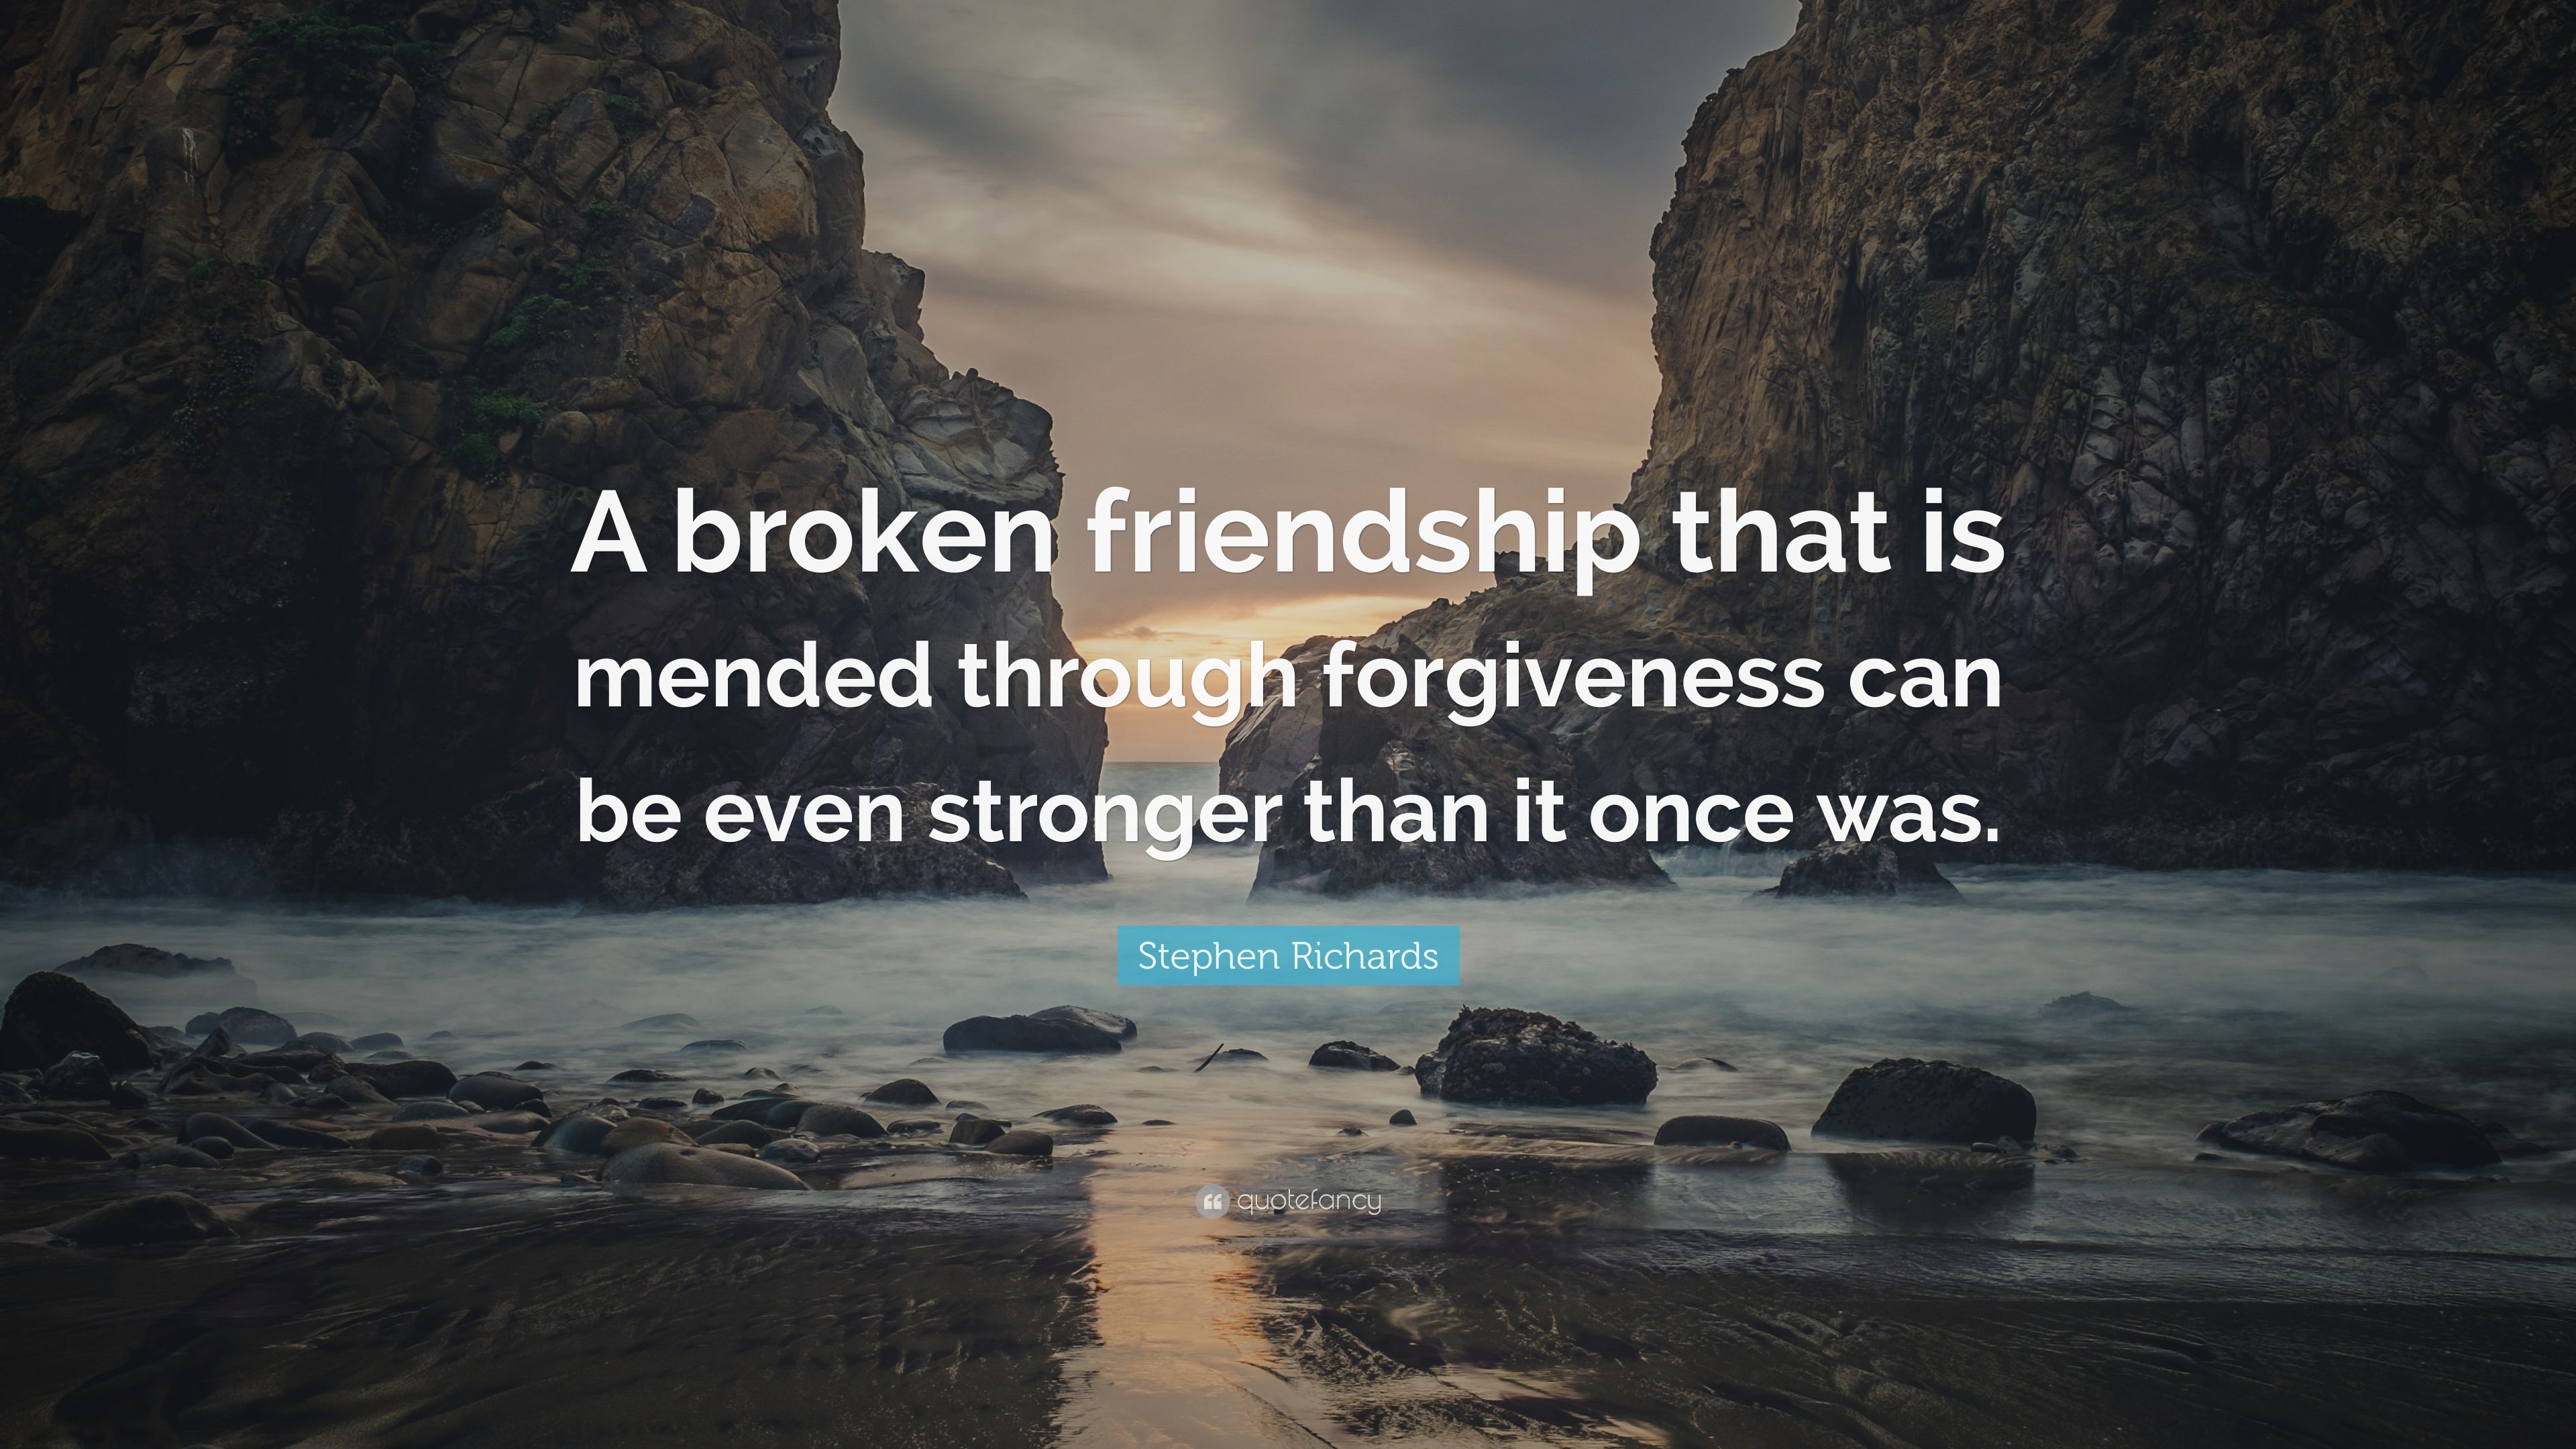 Stephen Richards Quote: “A broken friendship that is mended through forgiveness can be even stronger than